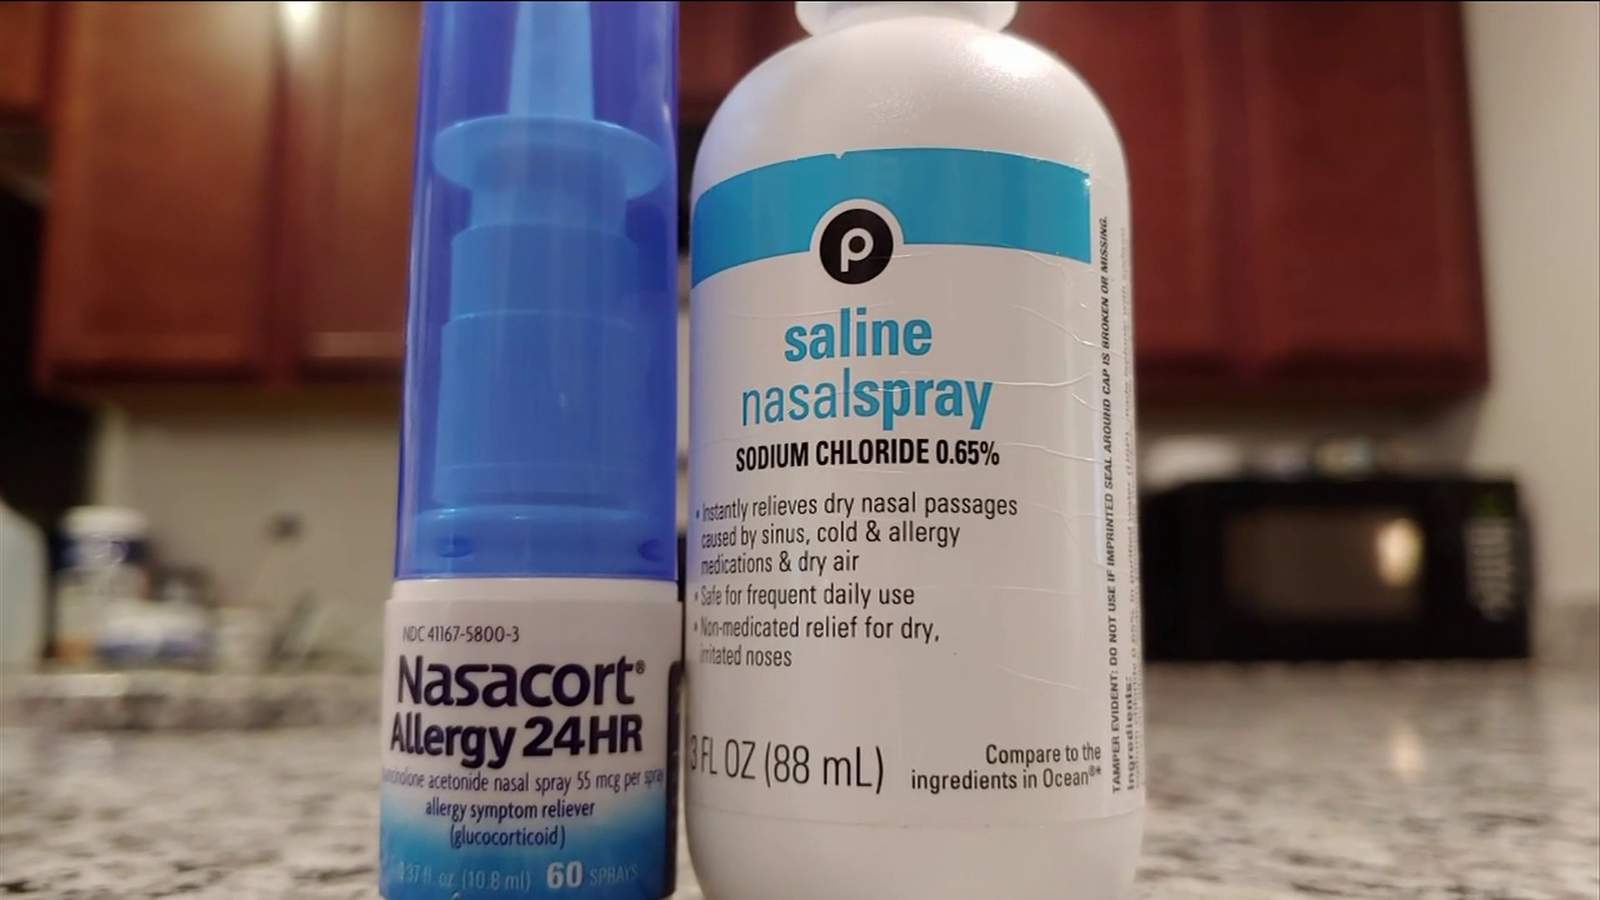 Allergy experts questioning nasal sprays due to coronavirus concerns